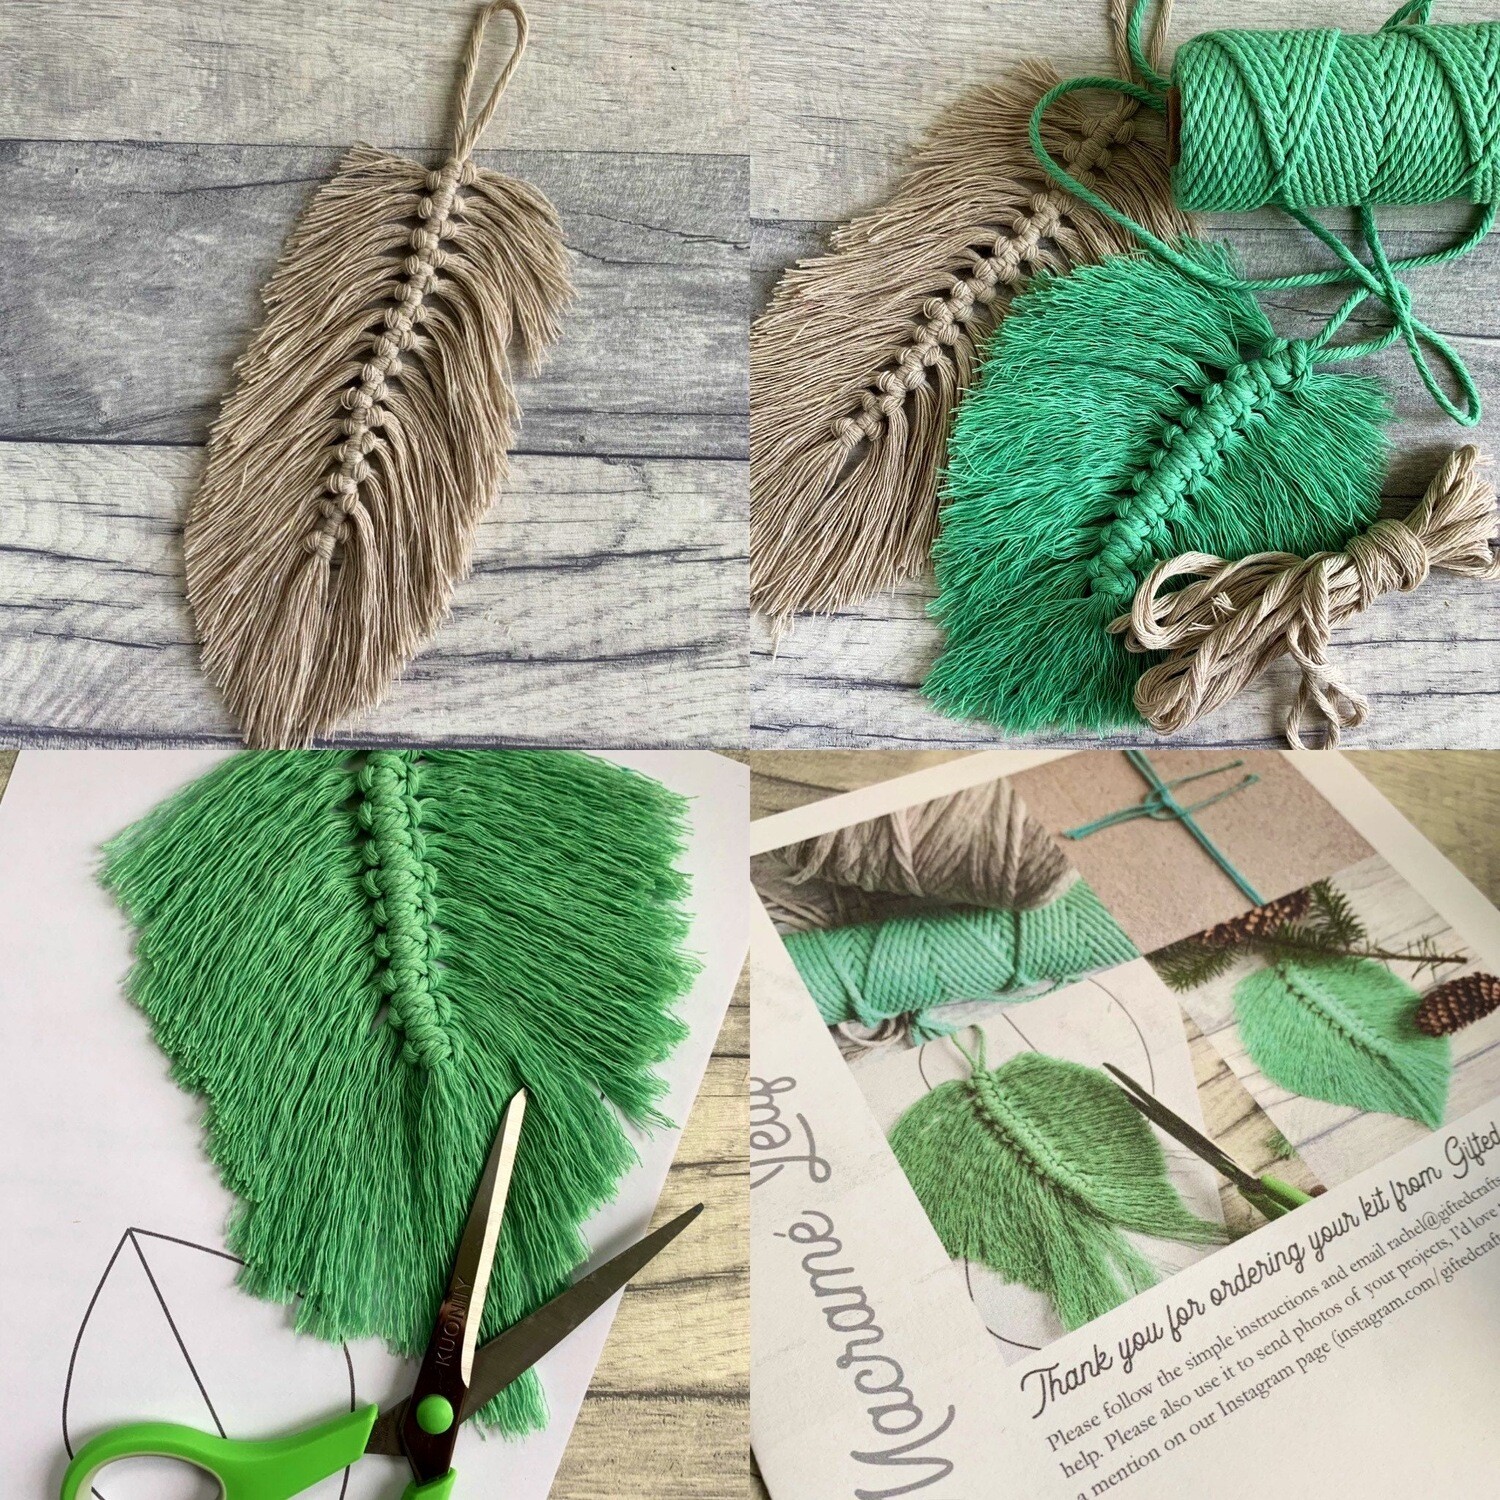 Indulgent Macrame Kit Subscription with Free Online Support